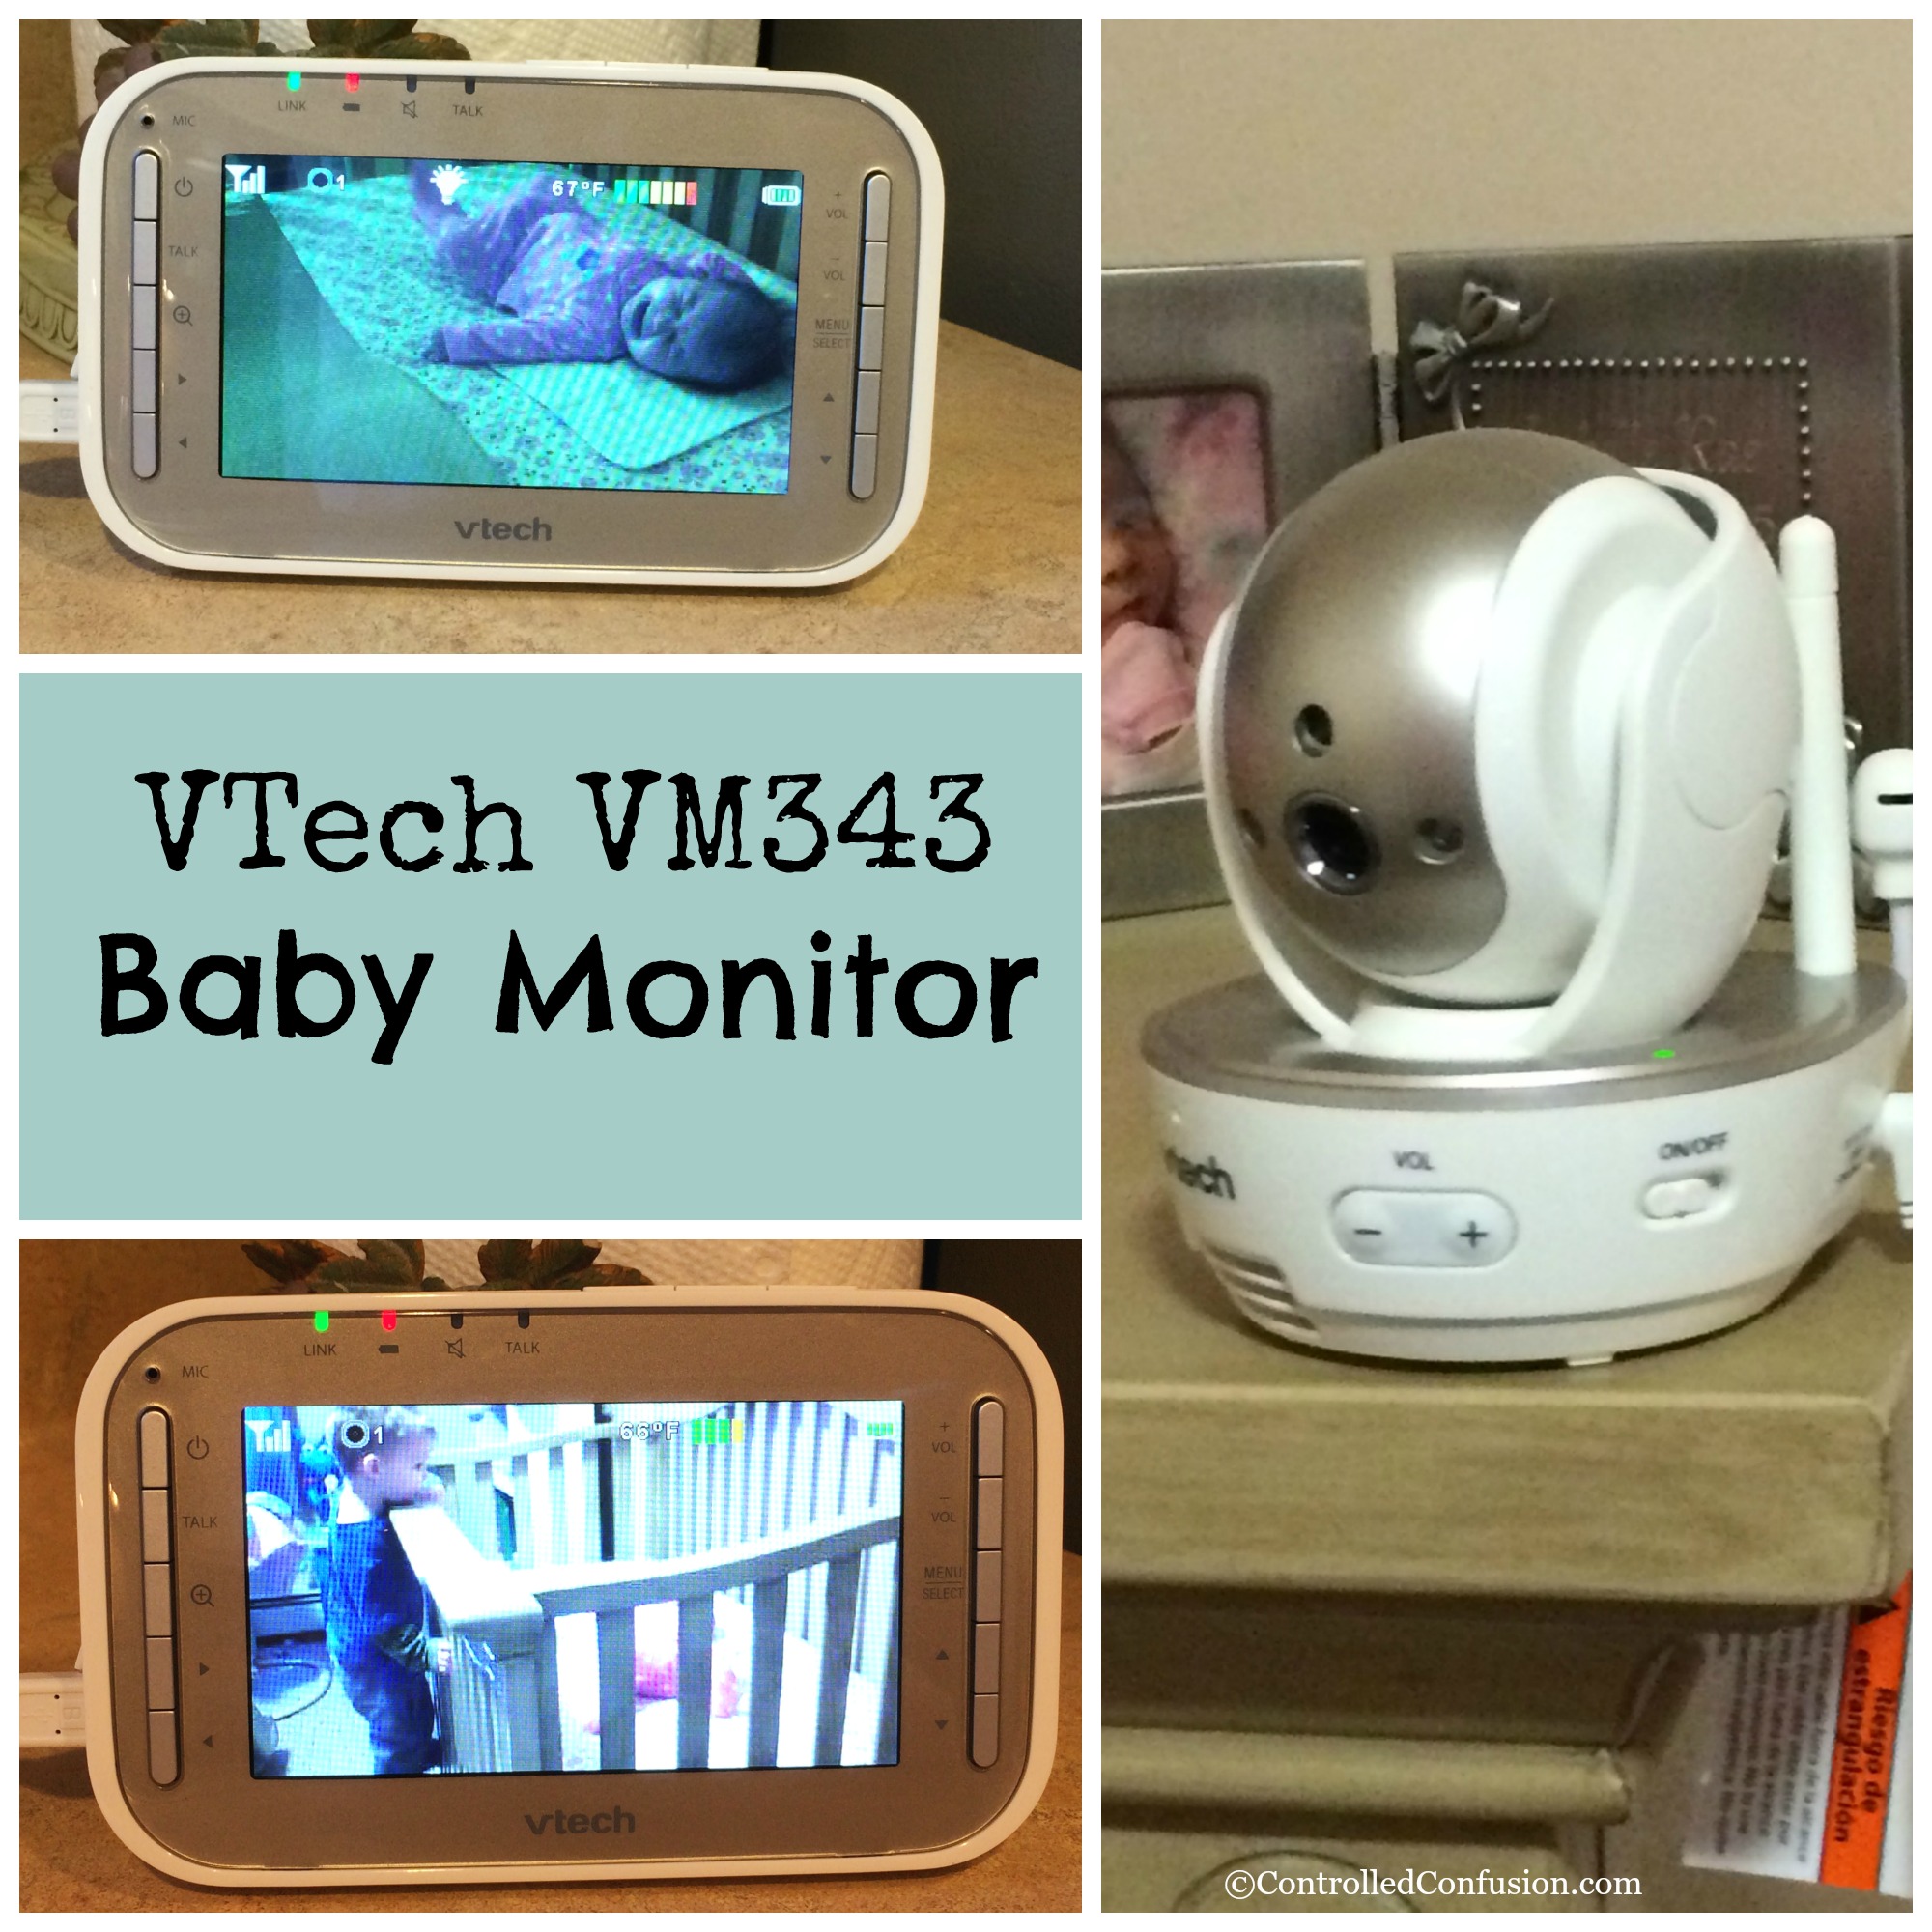 Have A Bird’s Eye View With The VTech VM343 Baby Monitor